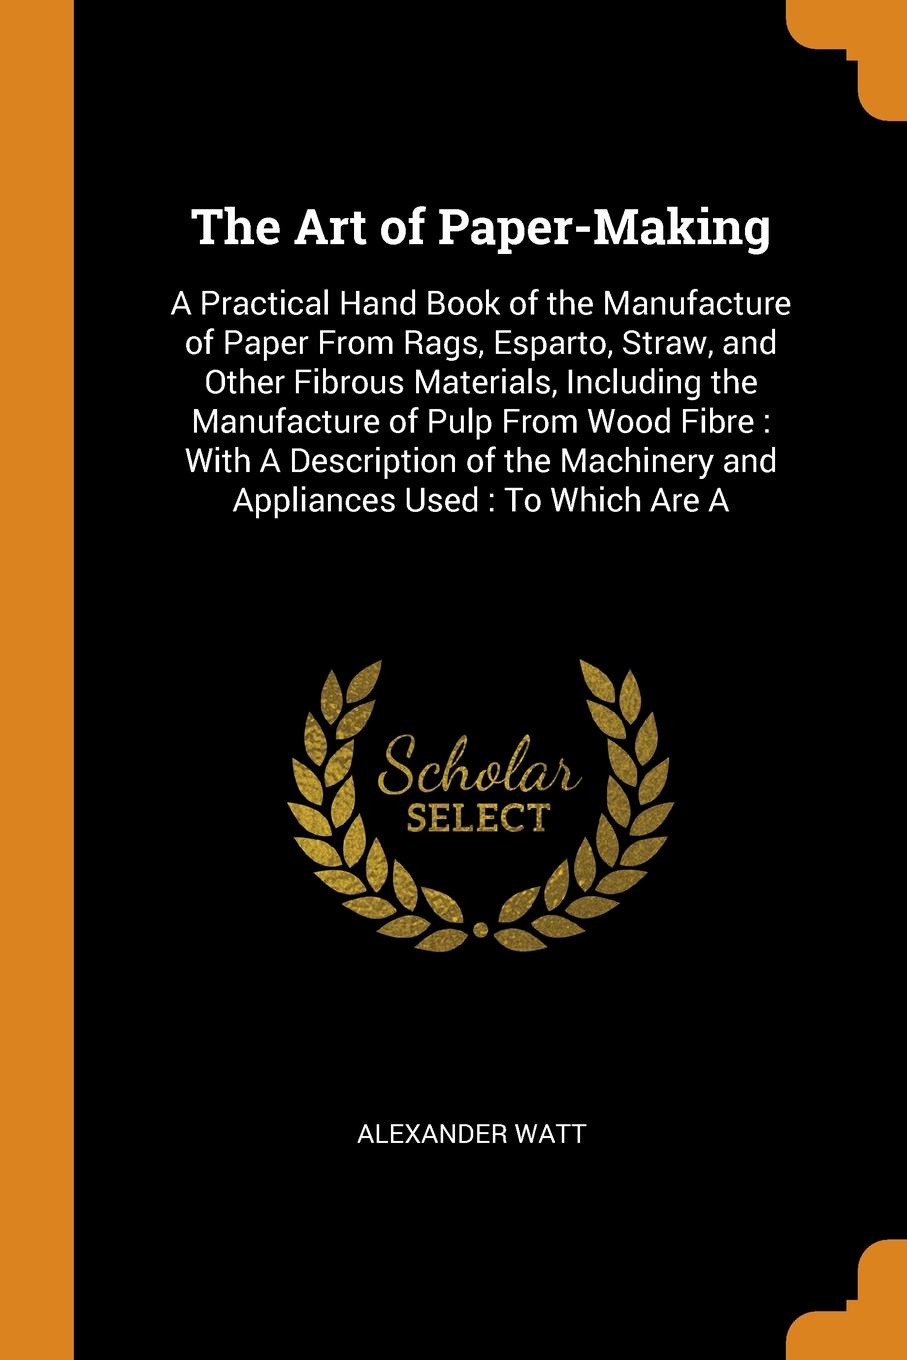 The Art of Paper-Making. A Practical Hand Book of the Manufacture of Paper From Rags, Esparto, Straw, and Other Fibrous Materials, Including the Manufacture of Pulp From Wood Fibre : With A Description of the Machinery and Appliances Used : To Whi...